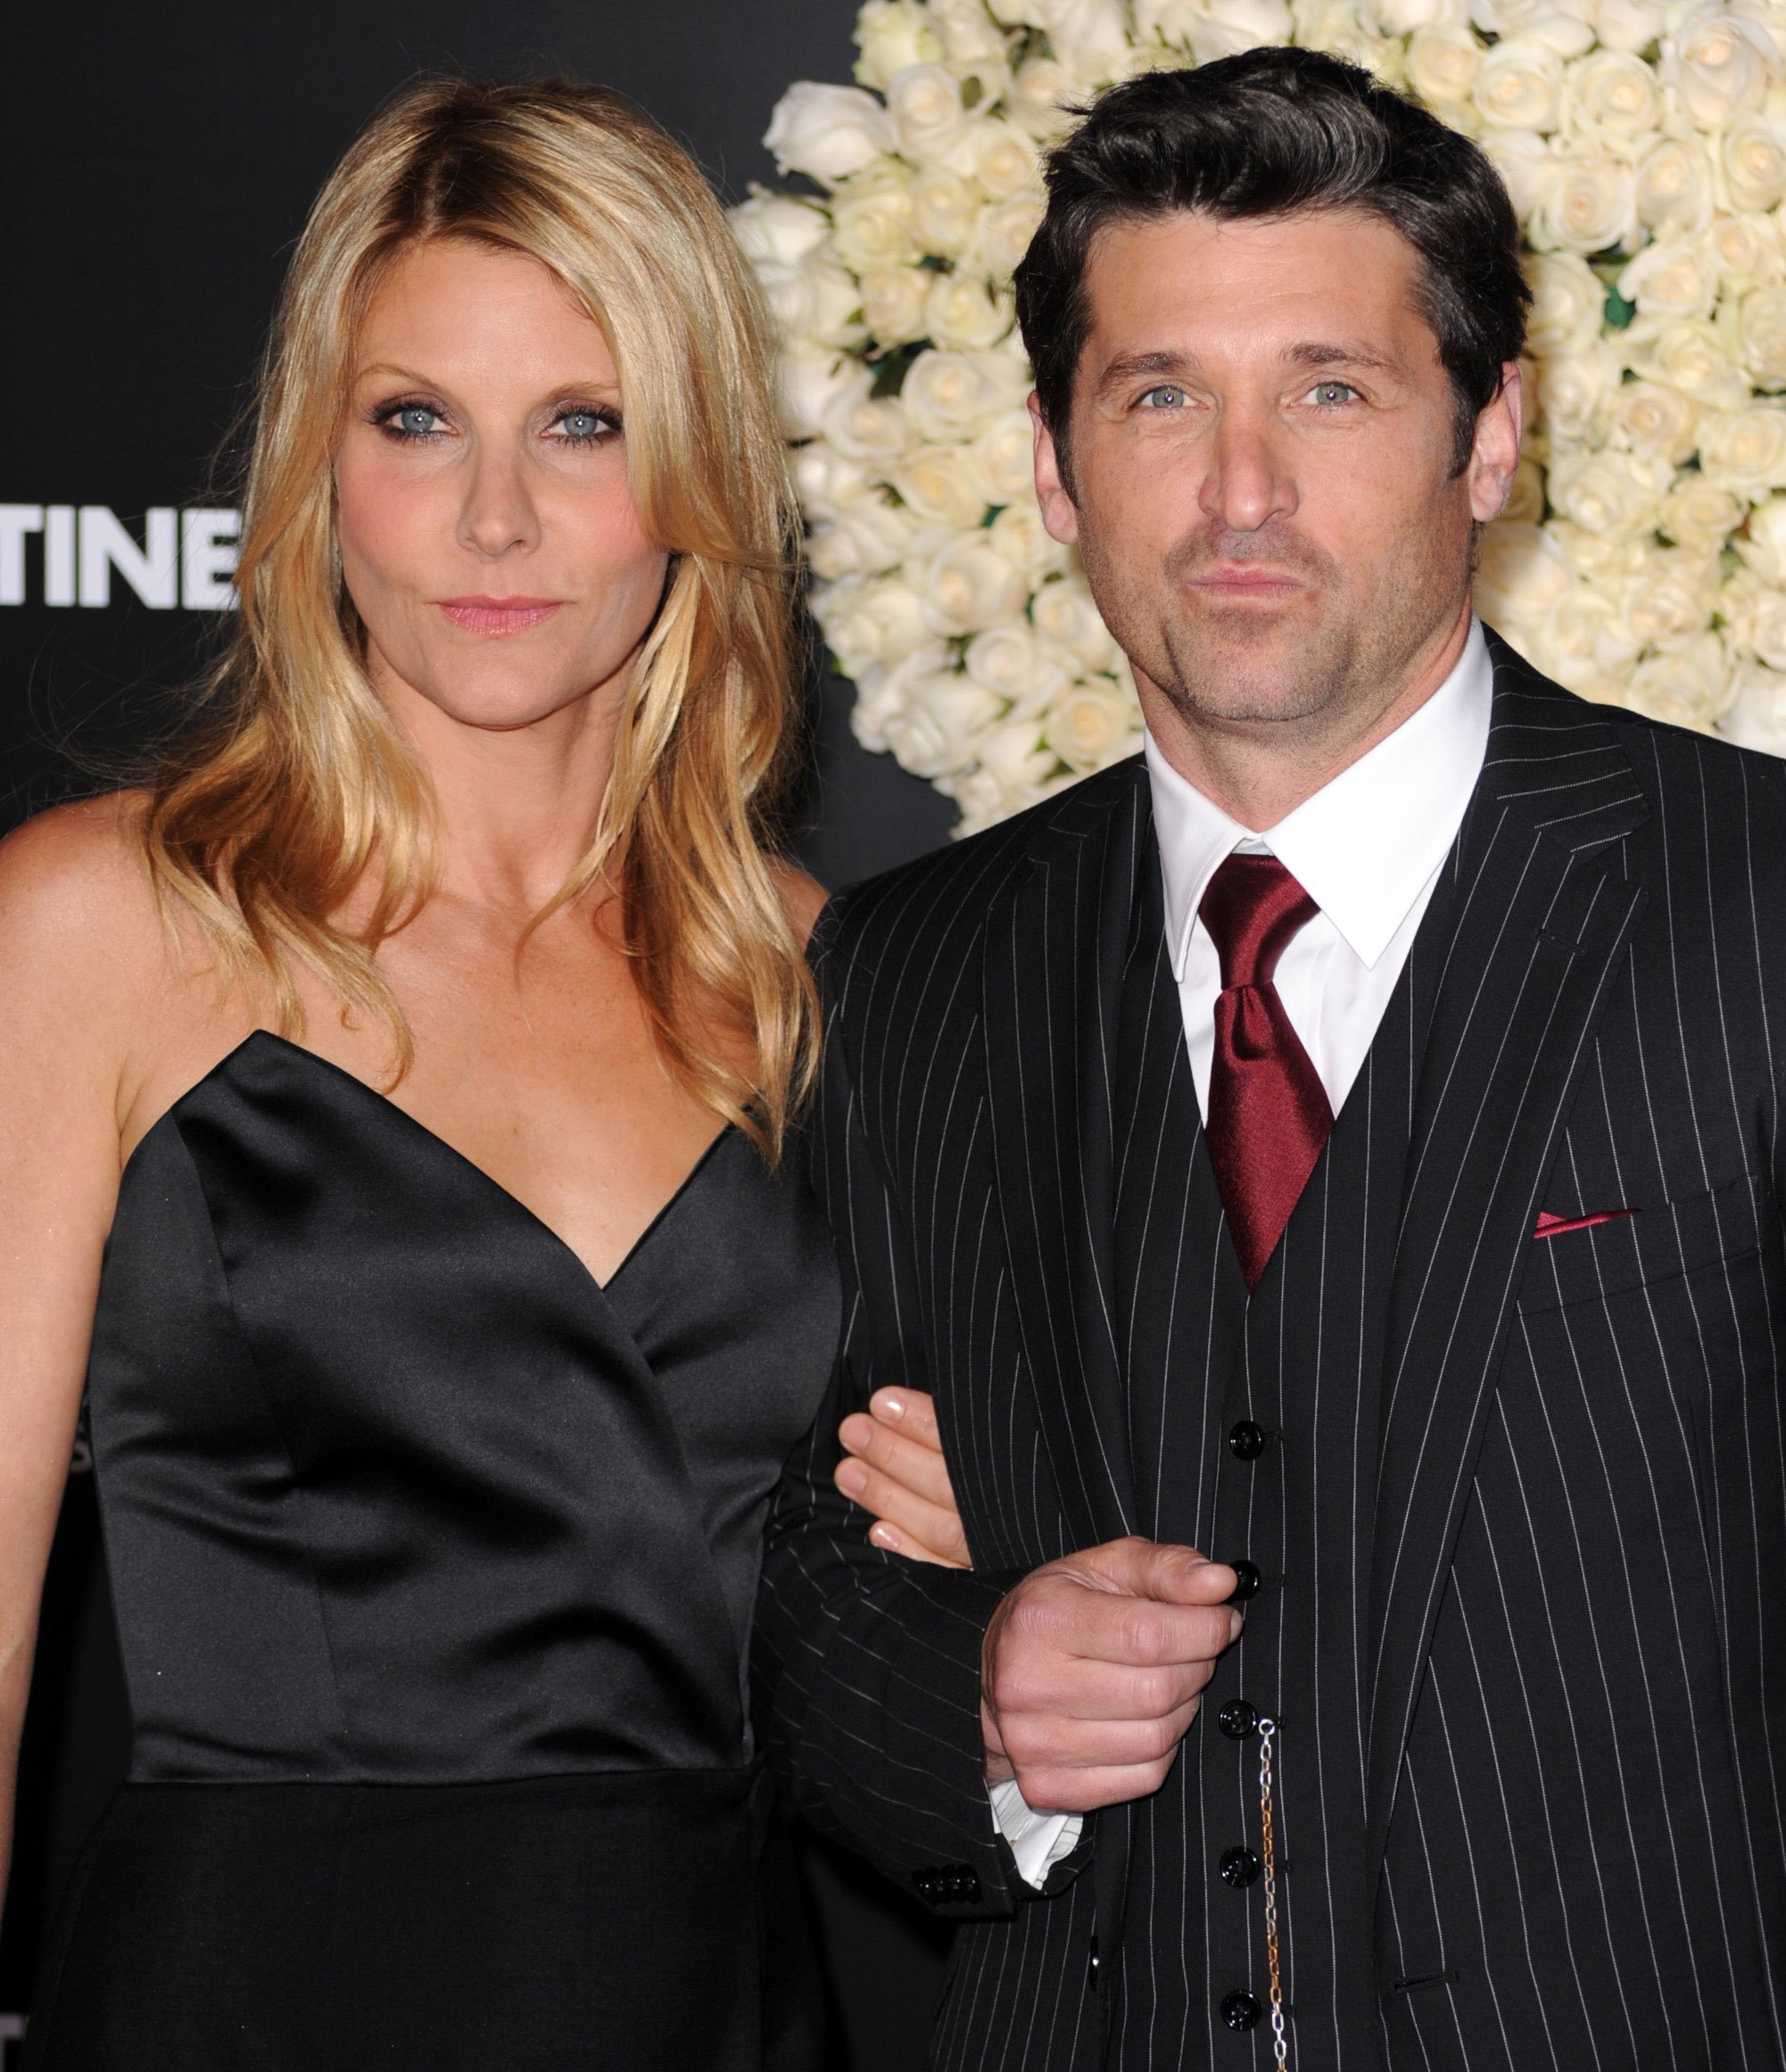 Actor Patrick Dempsey and wife Jillian Dempsey at Grauman's Chinese Theatre on February 8, 2010 in Hollywood, California. | Source: Getty Images